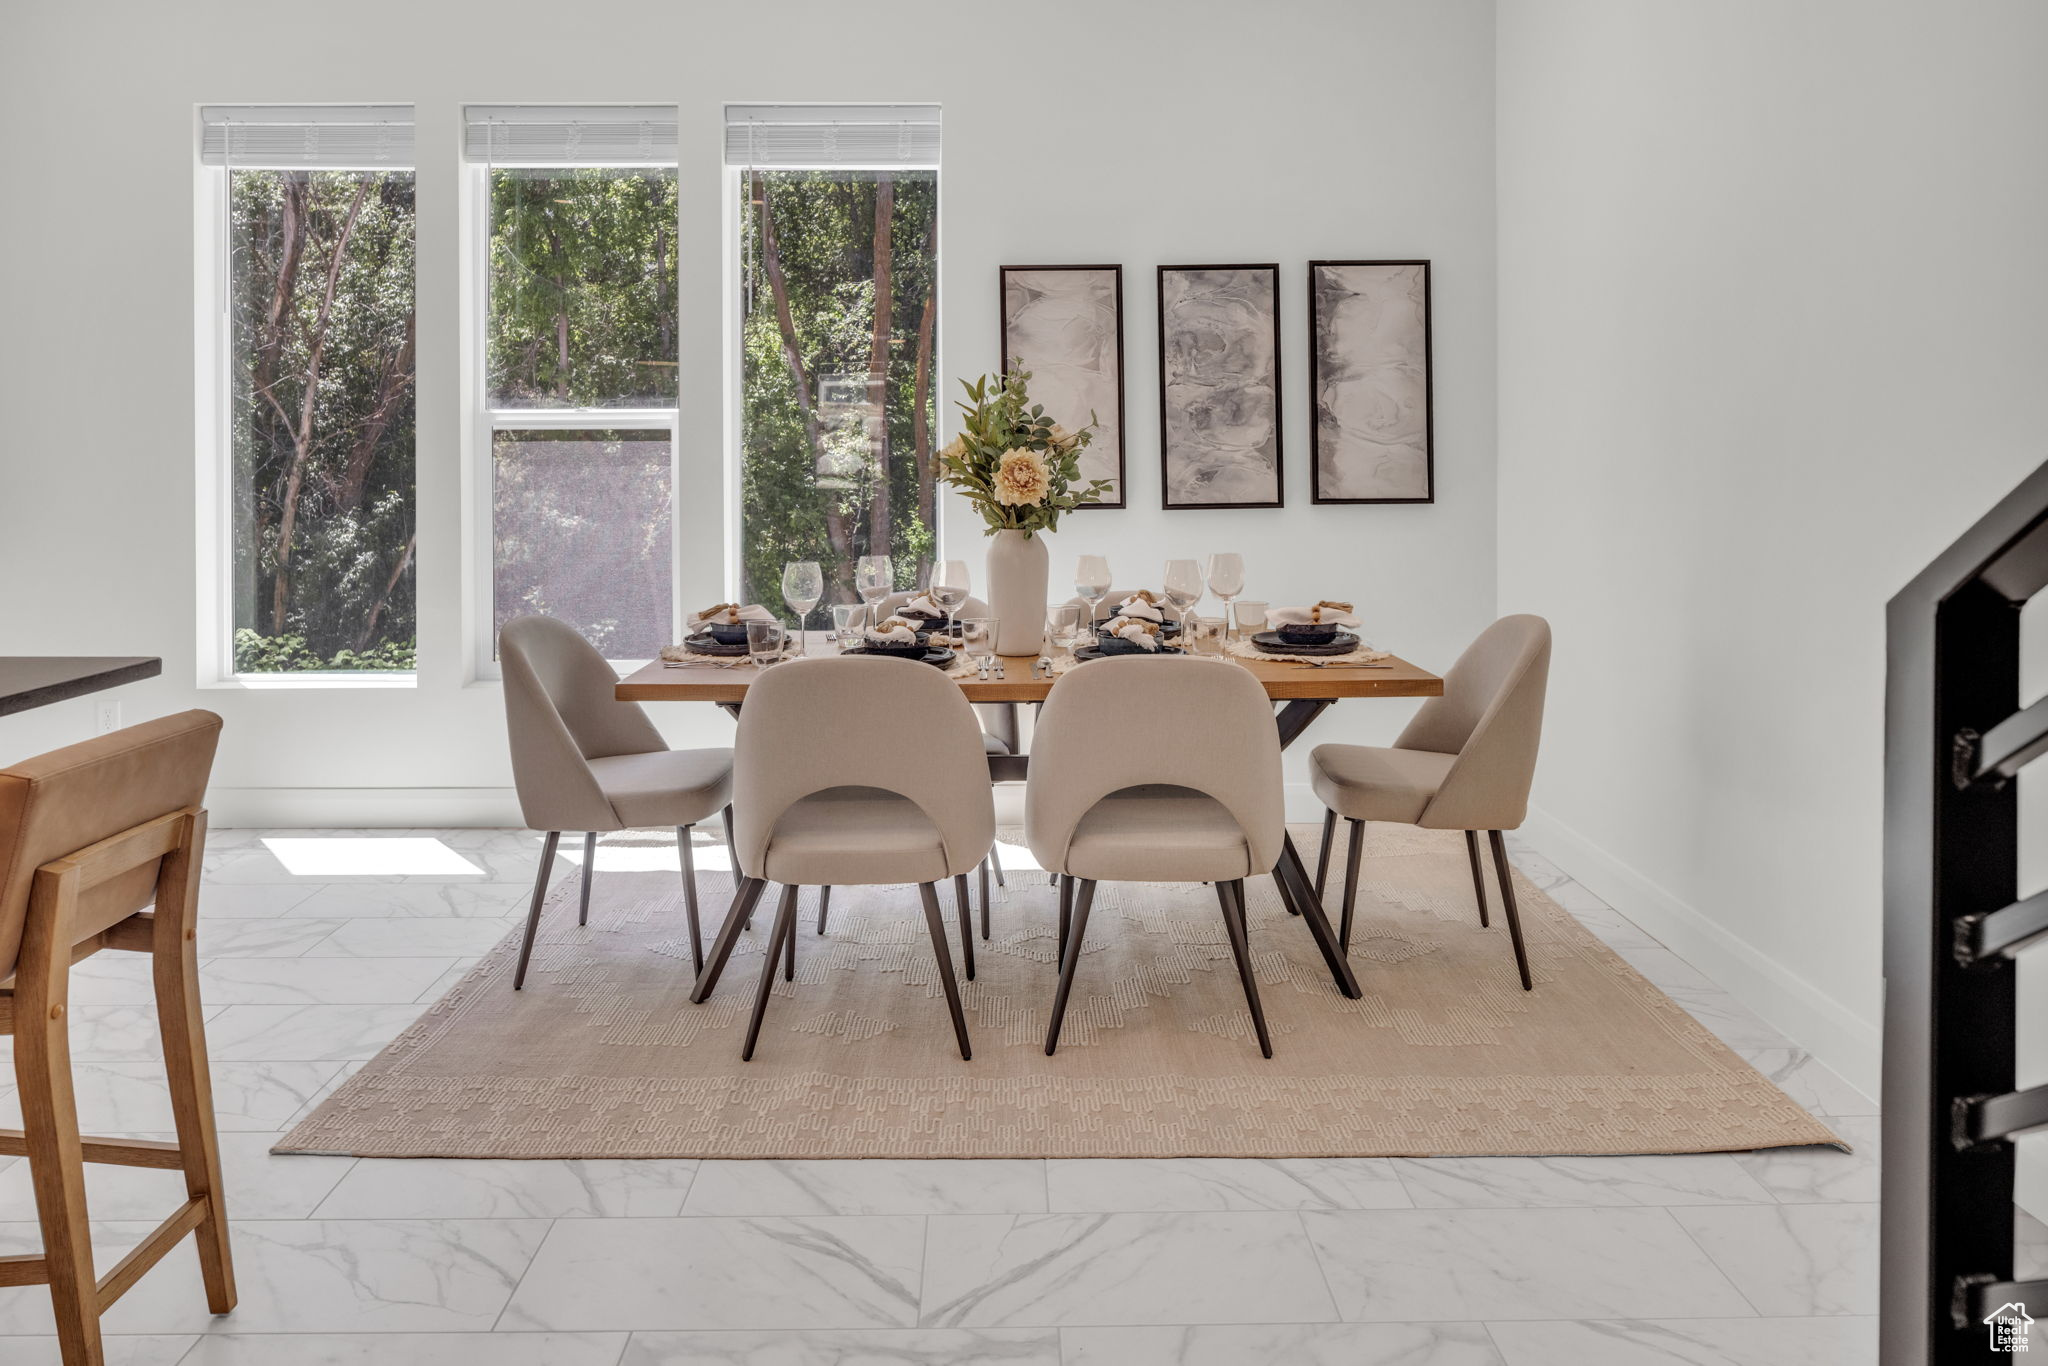 Dining area featuring plenty of natural light and light tile floors